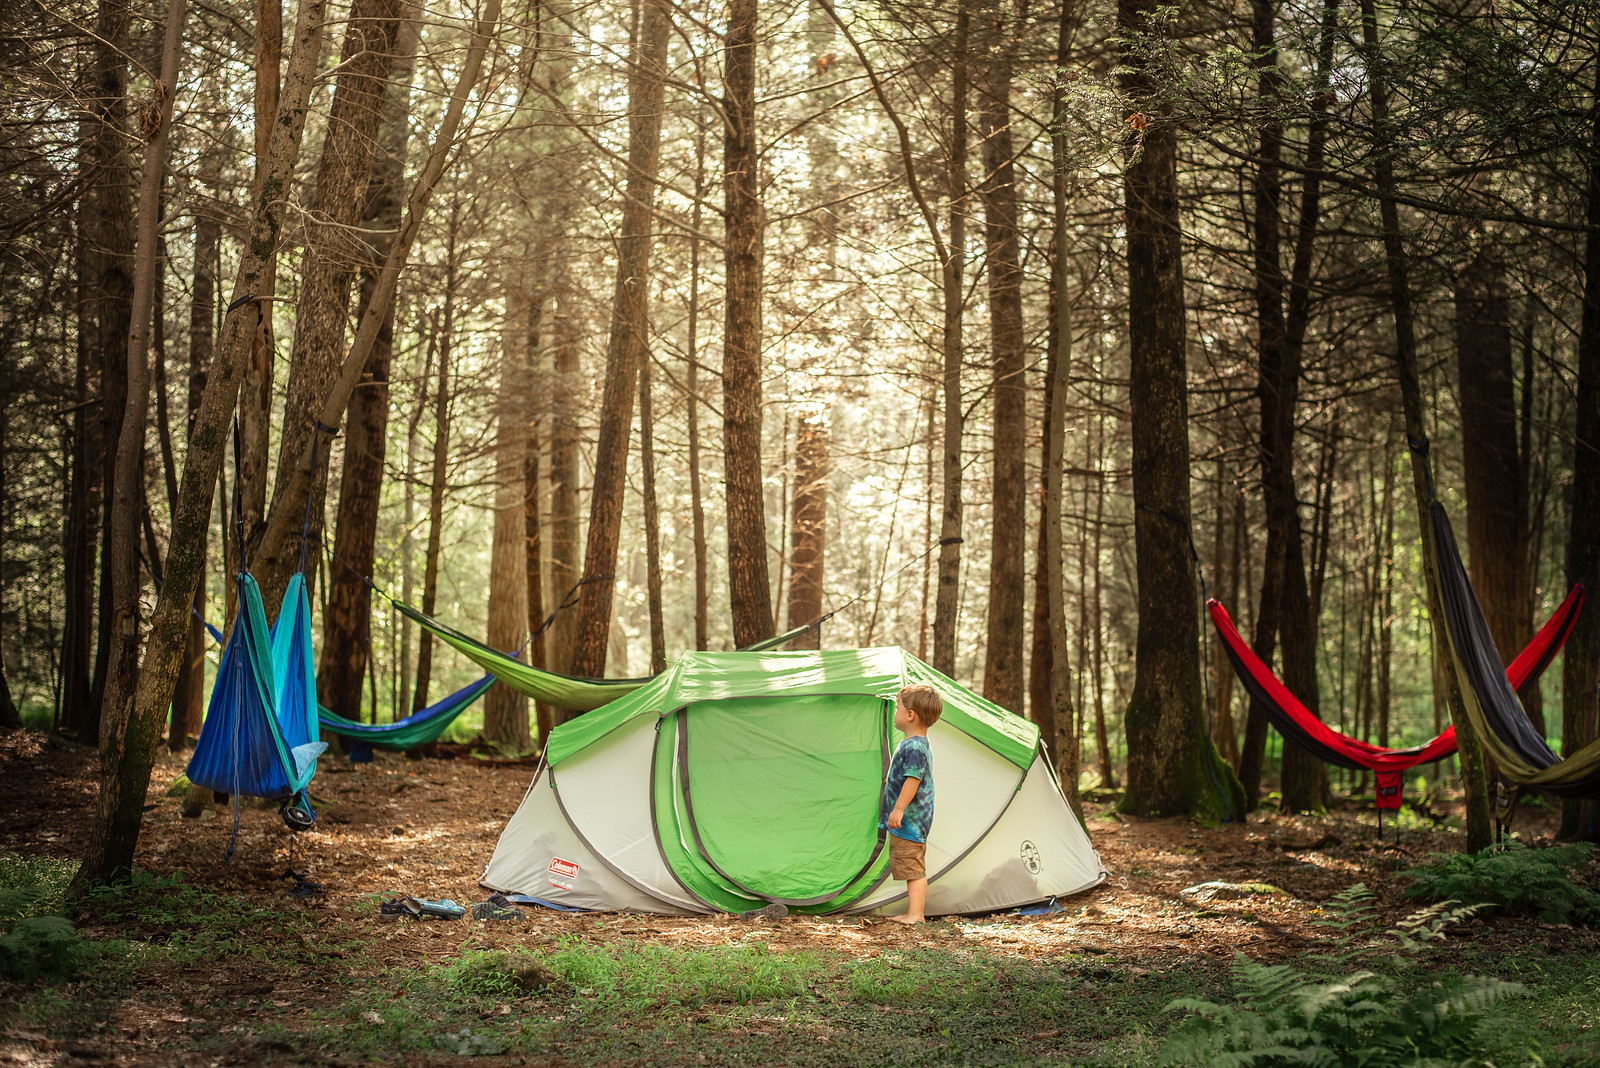 What to look for in a kid-friendly camping site by Jessica Nave for Hike it Baby